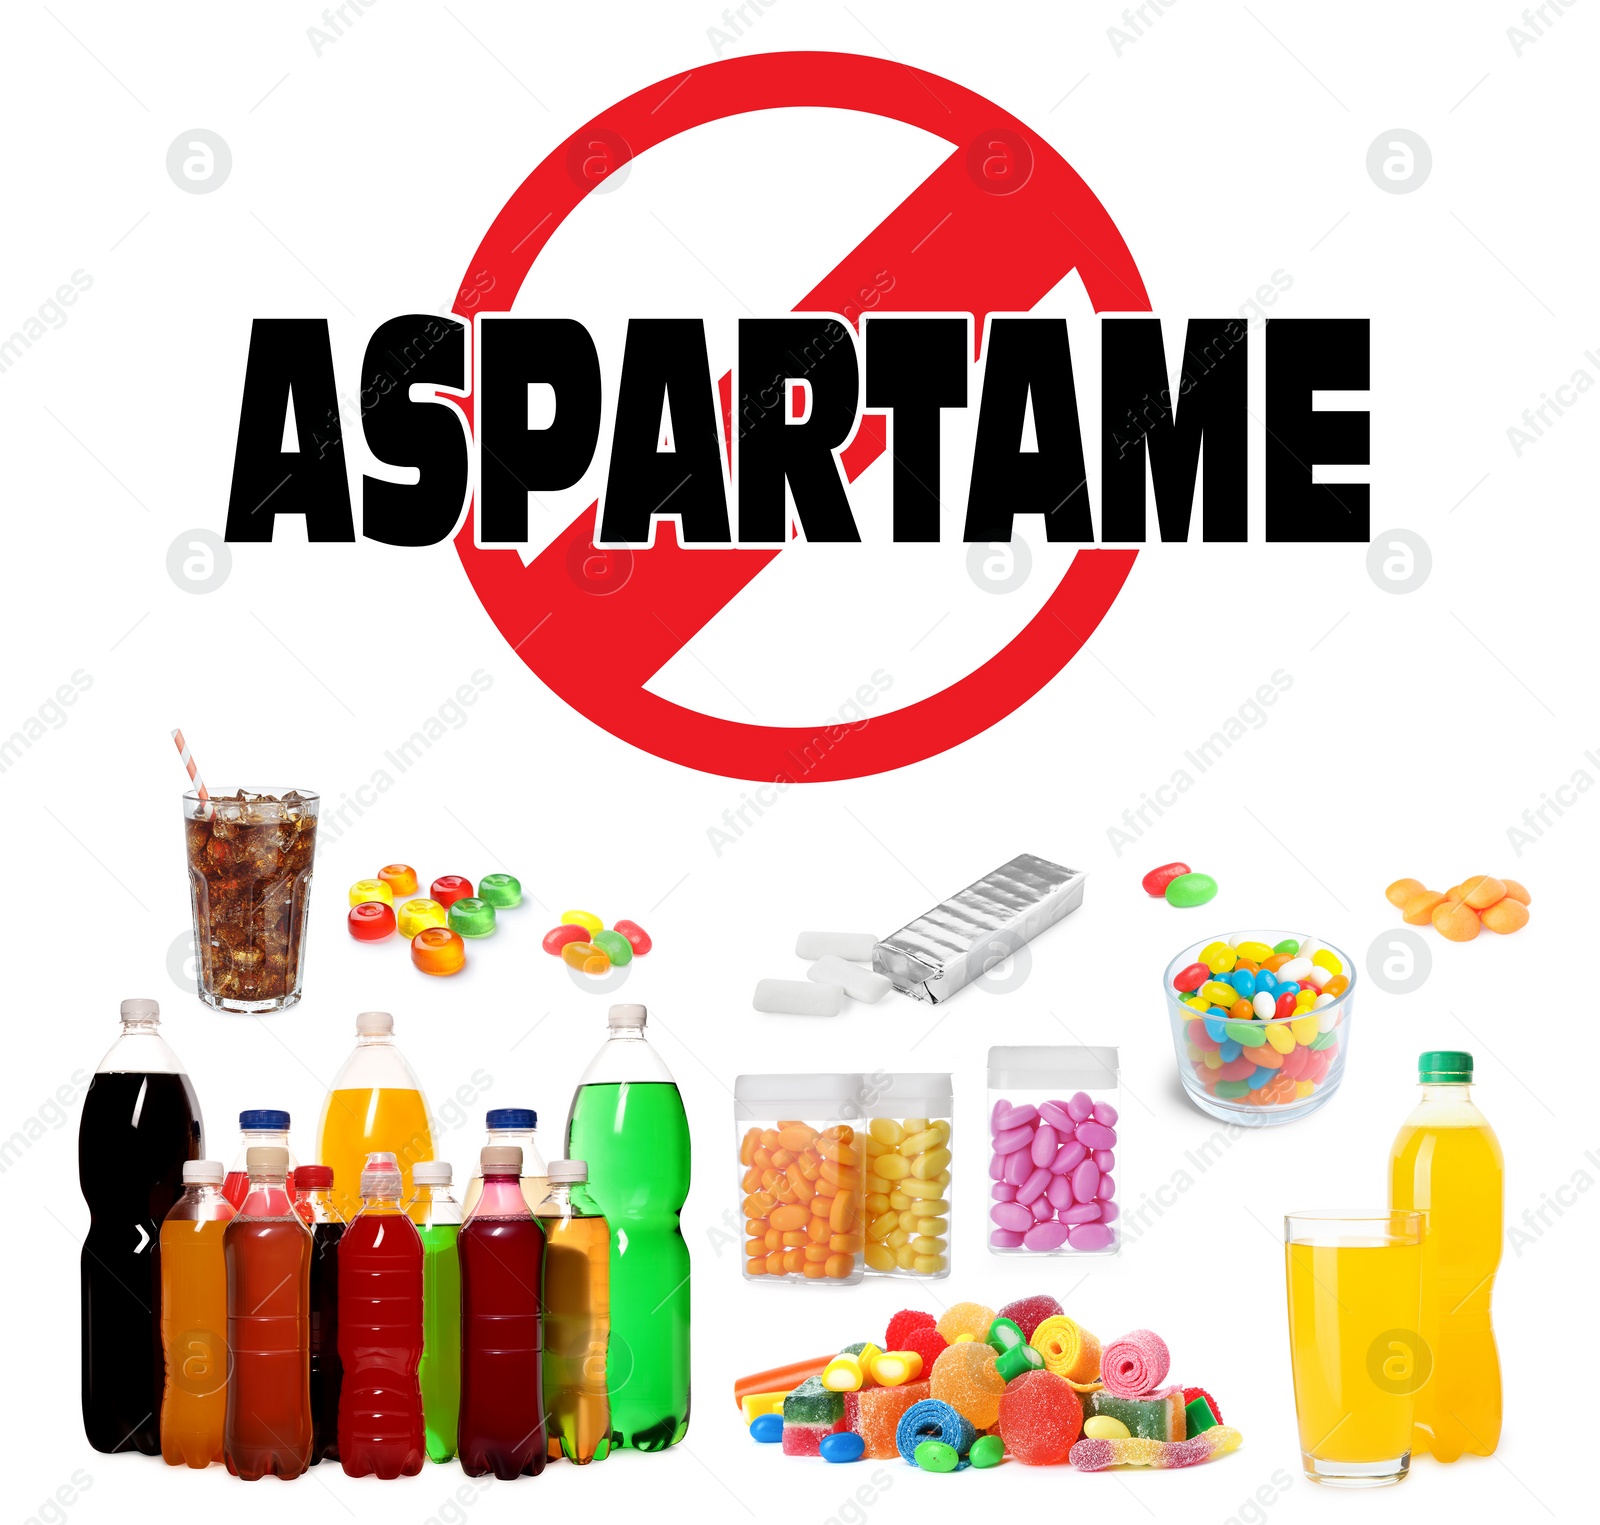 Image of Prohibition sign with word Aspartame symbolizing harm of this artificial sweetener. Different soda drinks and candies containing sugar substitute on white background